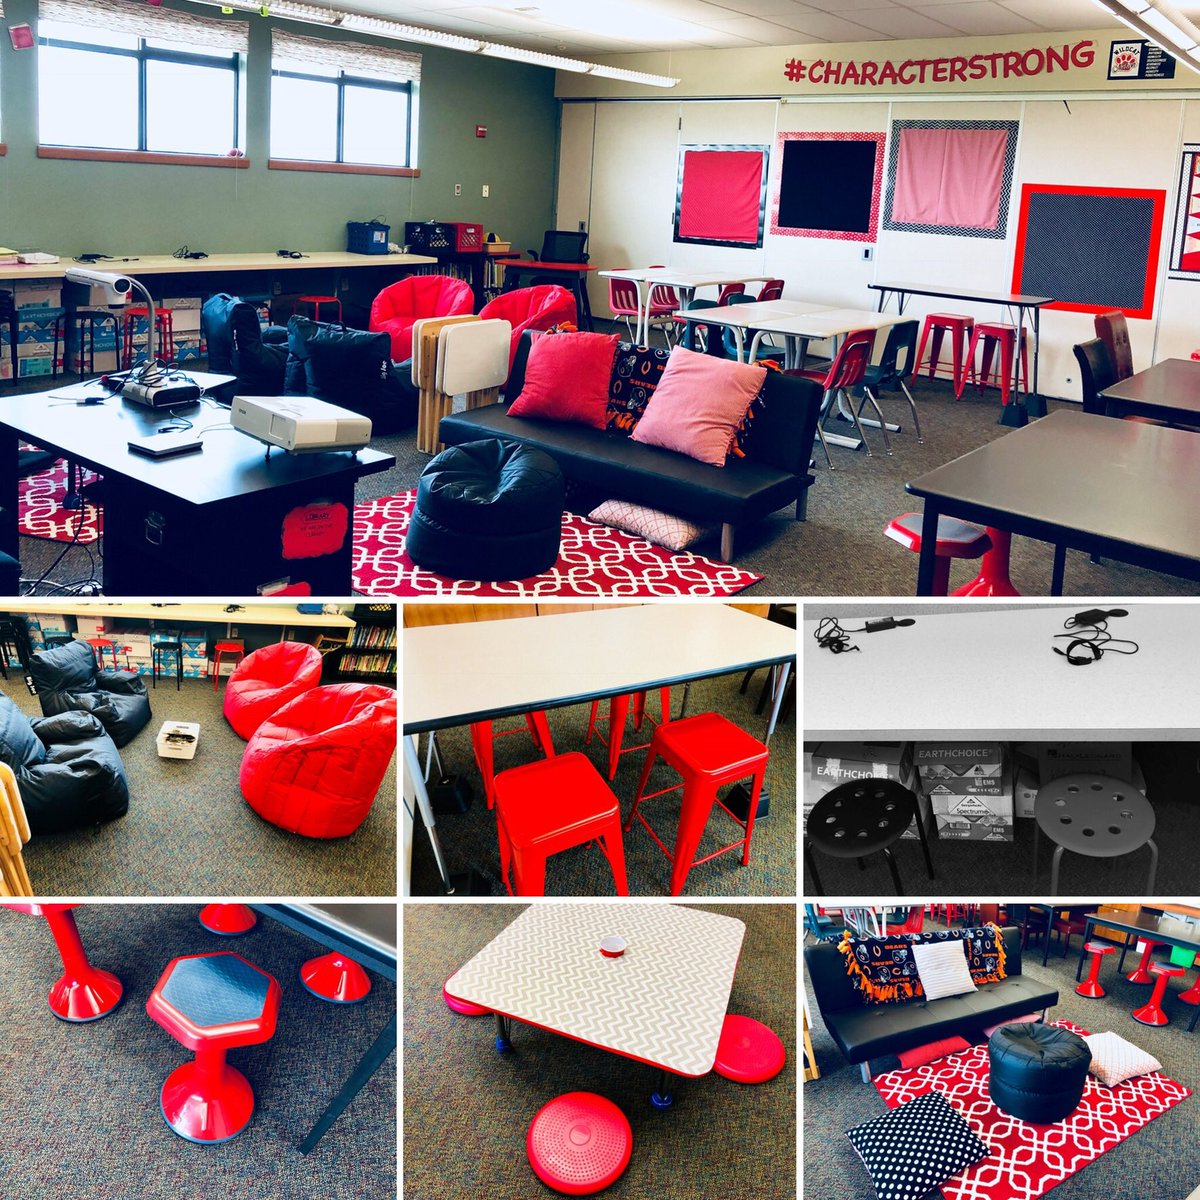 Setting up my #flexibleseating!  
Harnessing my #InnovatorsMindset as I get #RealEdu and #FutureDriven in my attempt to create an #AwardWinningCulture by creating #GenuisHour while #LeadLit #LeadUpTeach 

@gcouros @cultofpedagogy @TopDogTeaching